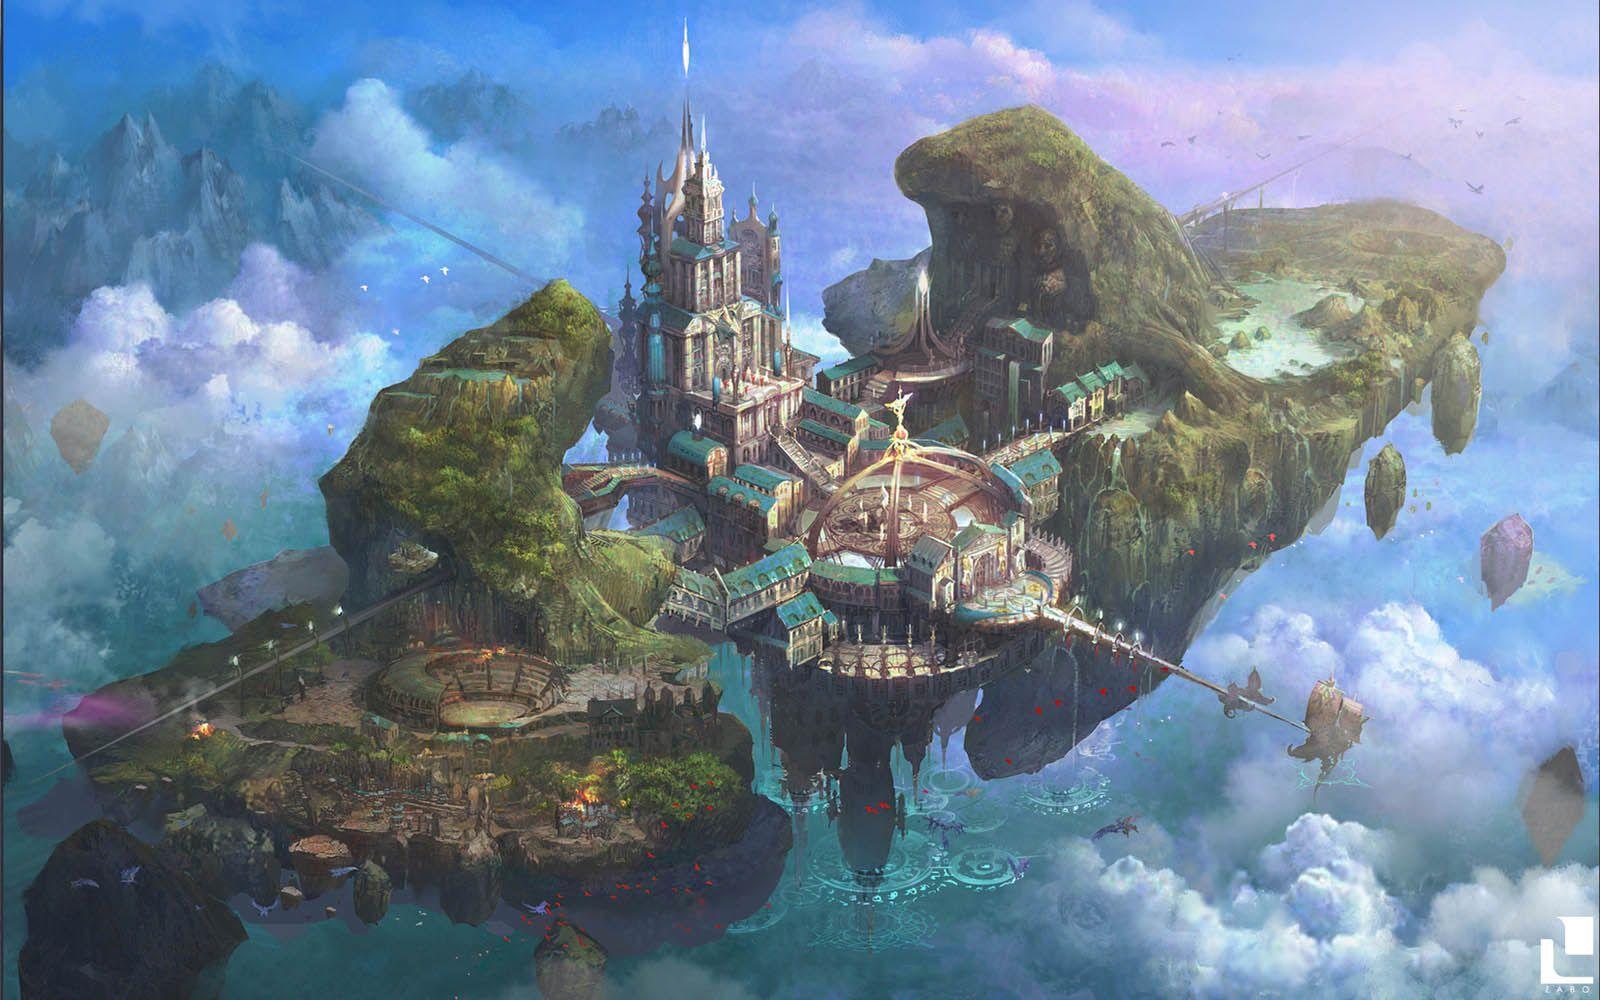 Castle In The Sky Wallpapers Top Free Castle In The Sky Images, Photos, Reviews